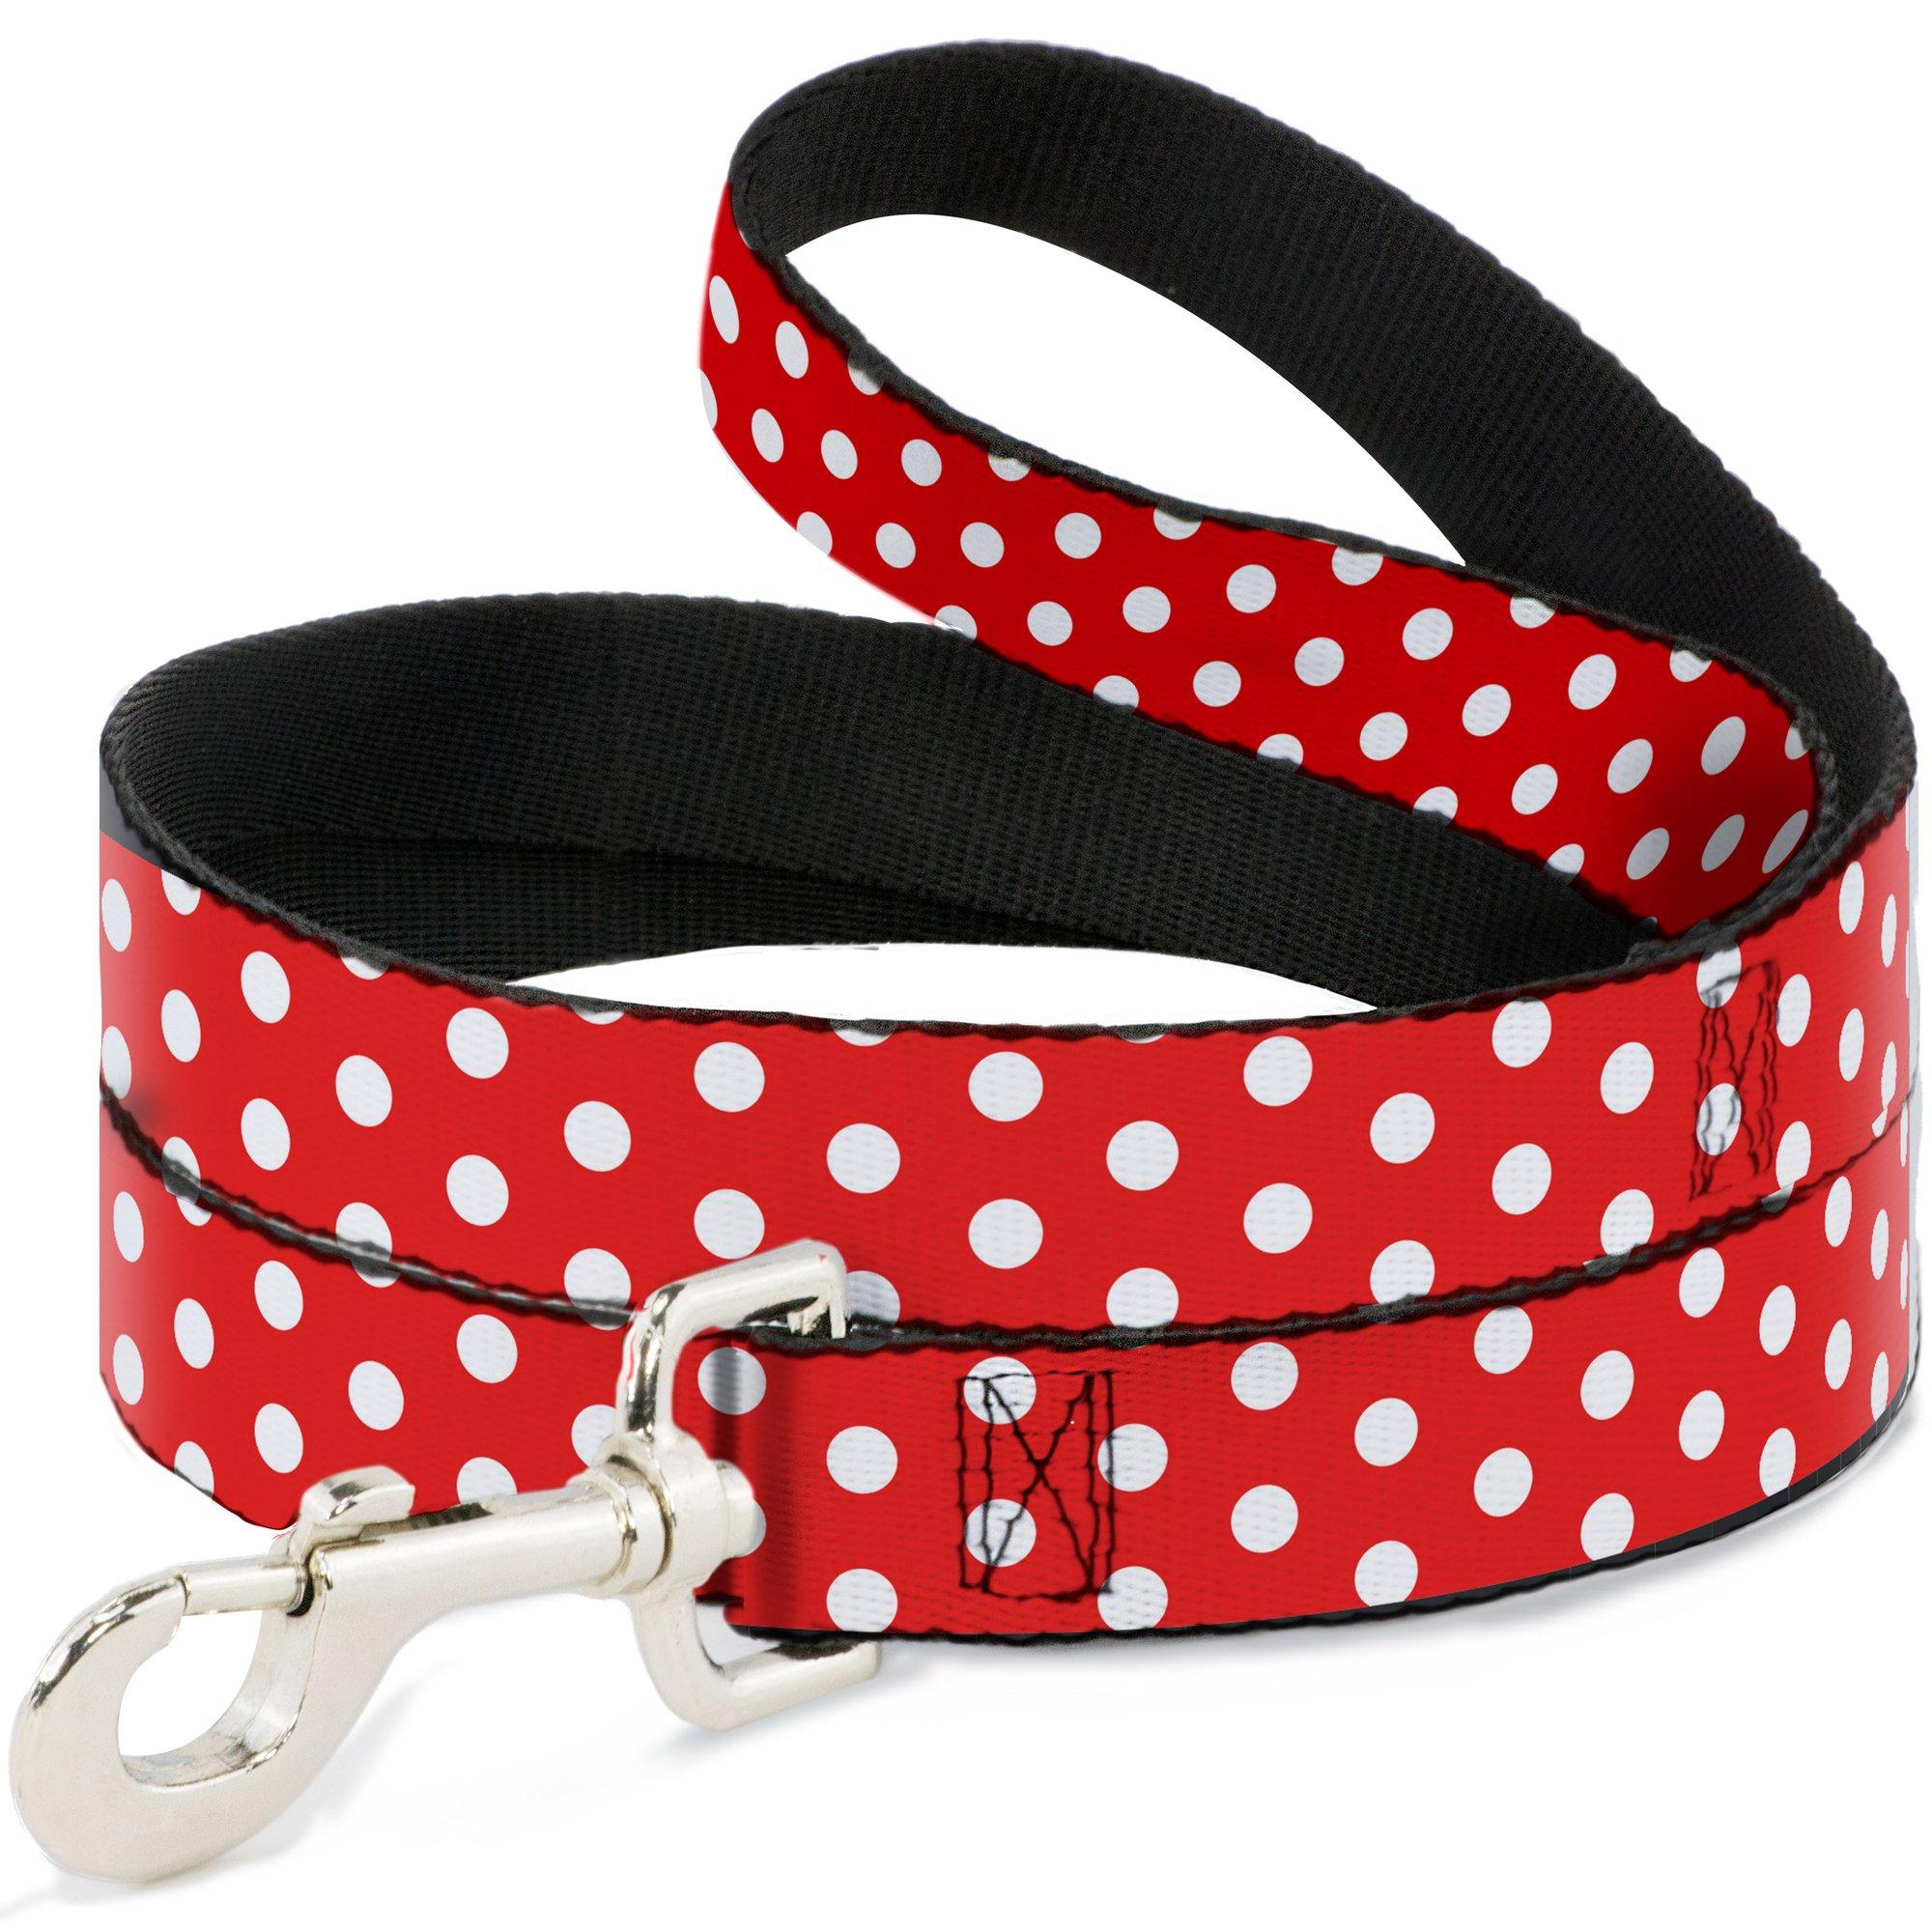 Minnie Mouse Dog Leash by Buckle-Down - Red/White